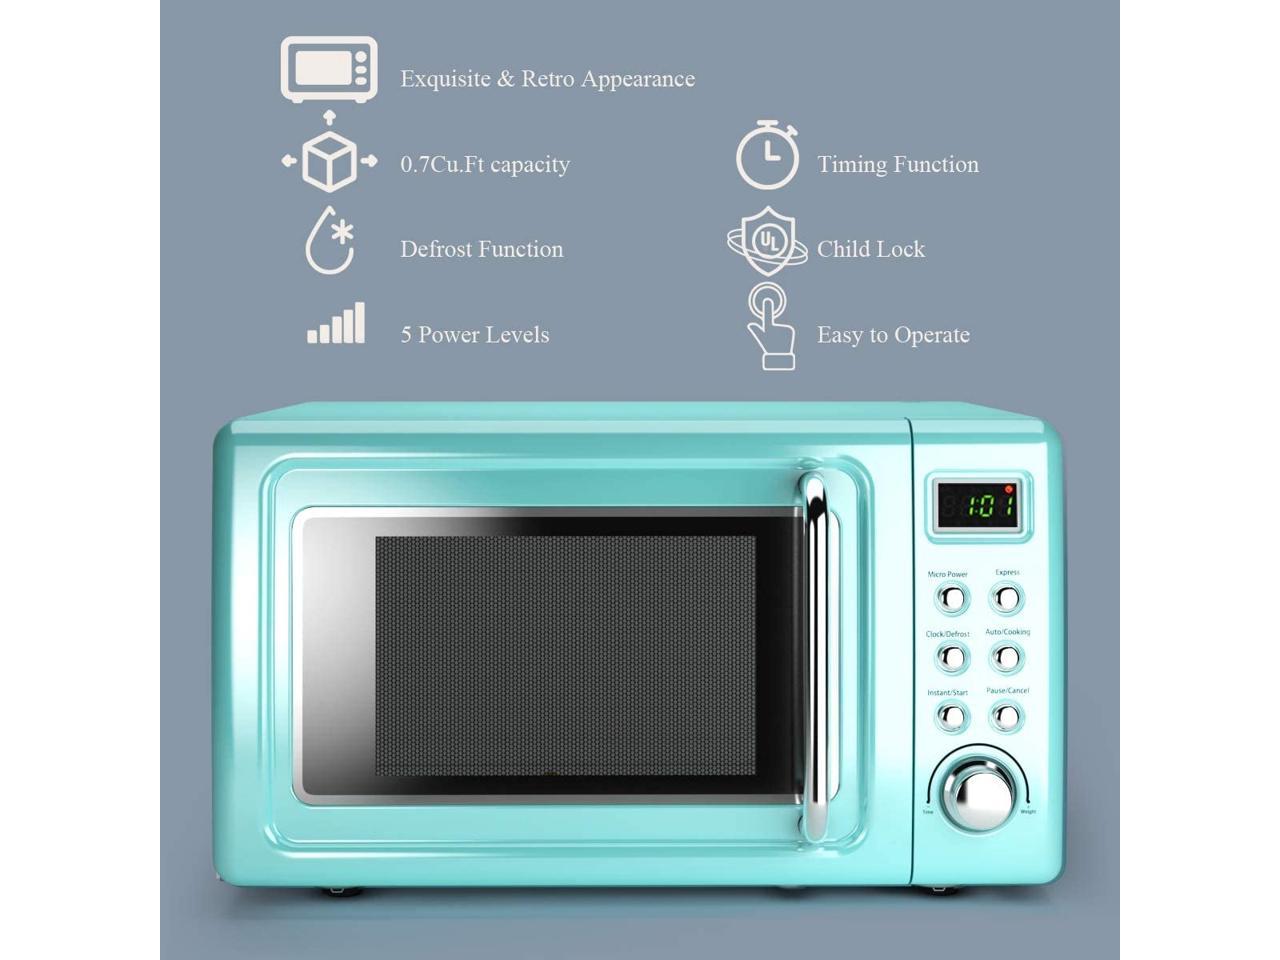 LED Display White COSTWAY Retro Countertop Microwave Oven Cold Rolled Steel Plate 700-Watt Child Lock 0.7Cu.ft 5 Micro Power with Glass Turntable & Viewing Window Delayed Start Function